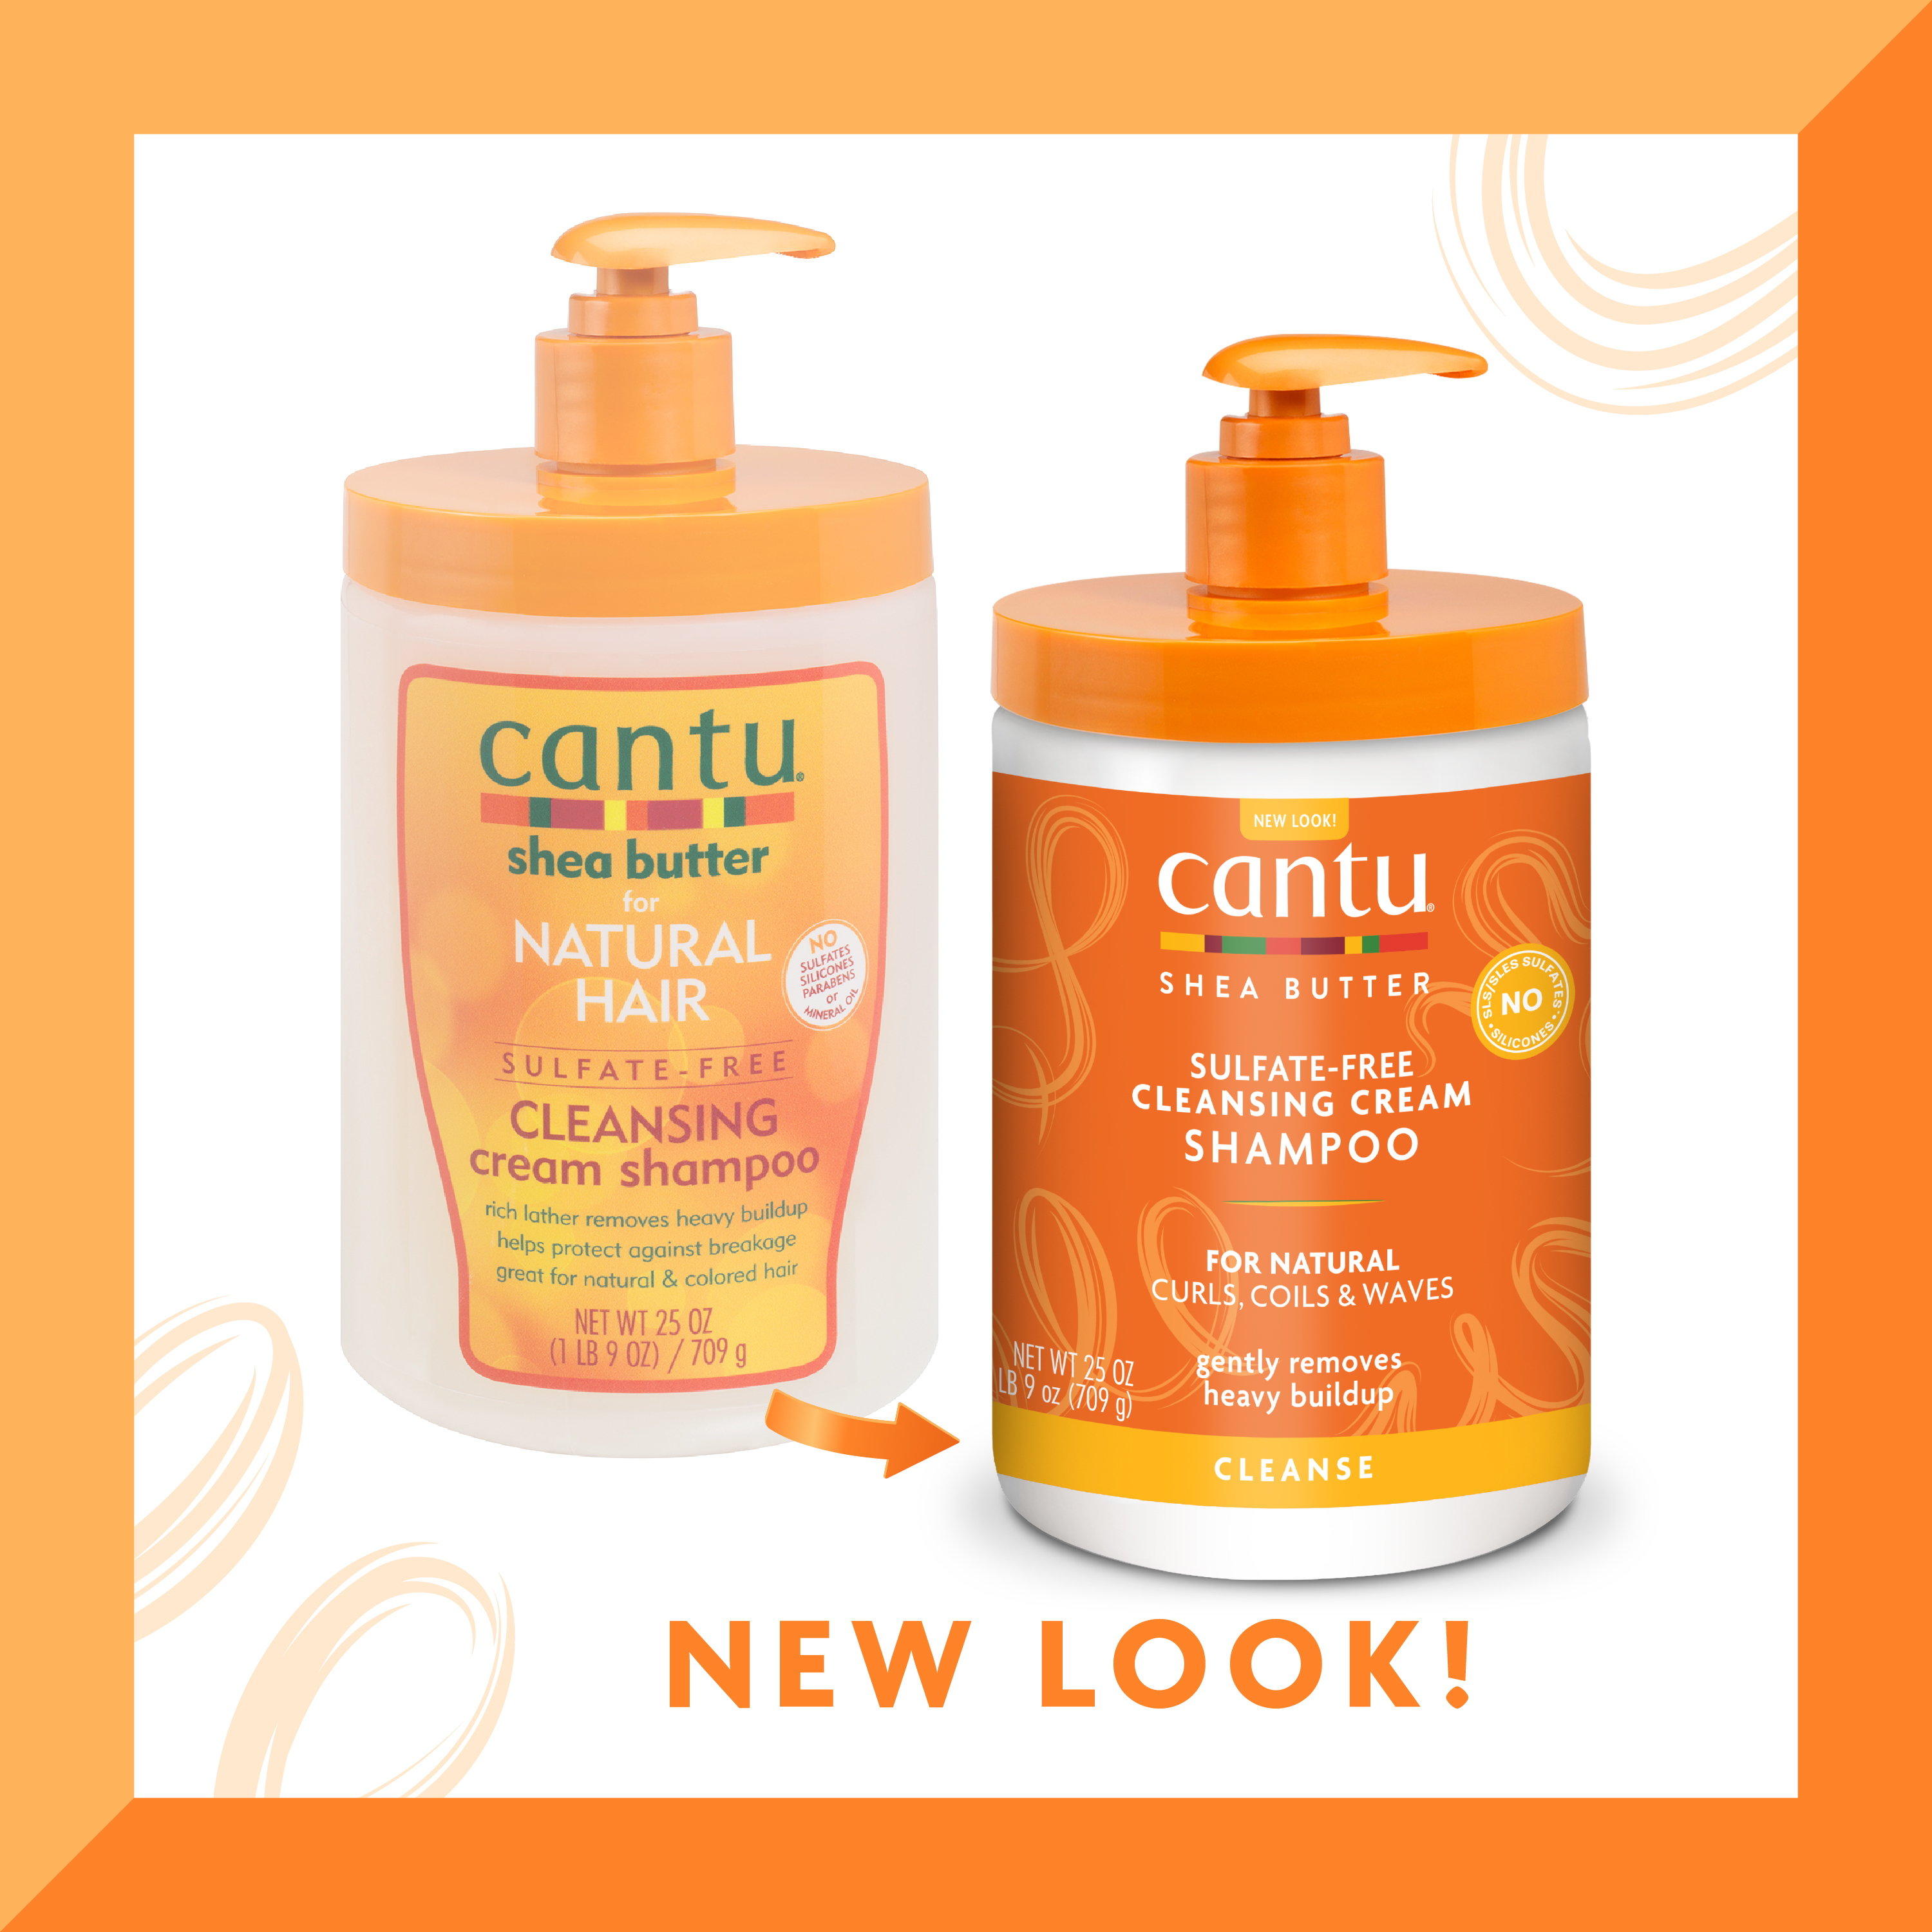 Cantu Sulfate-Free Cleansing Cream Shampoo for Natural Hair, Sulfate-Free with Shea Butter, 25 fl oz. - image 4 of 12